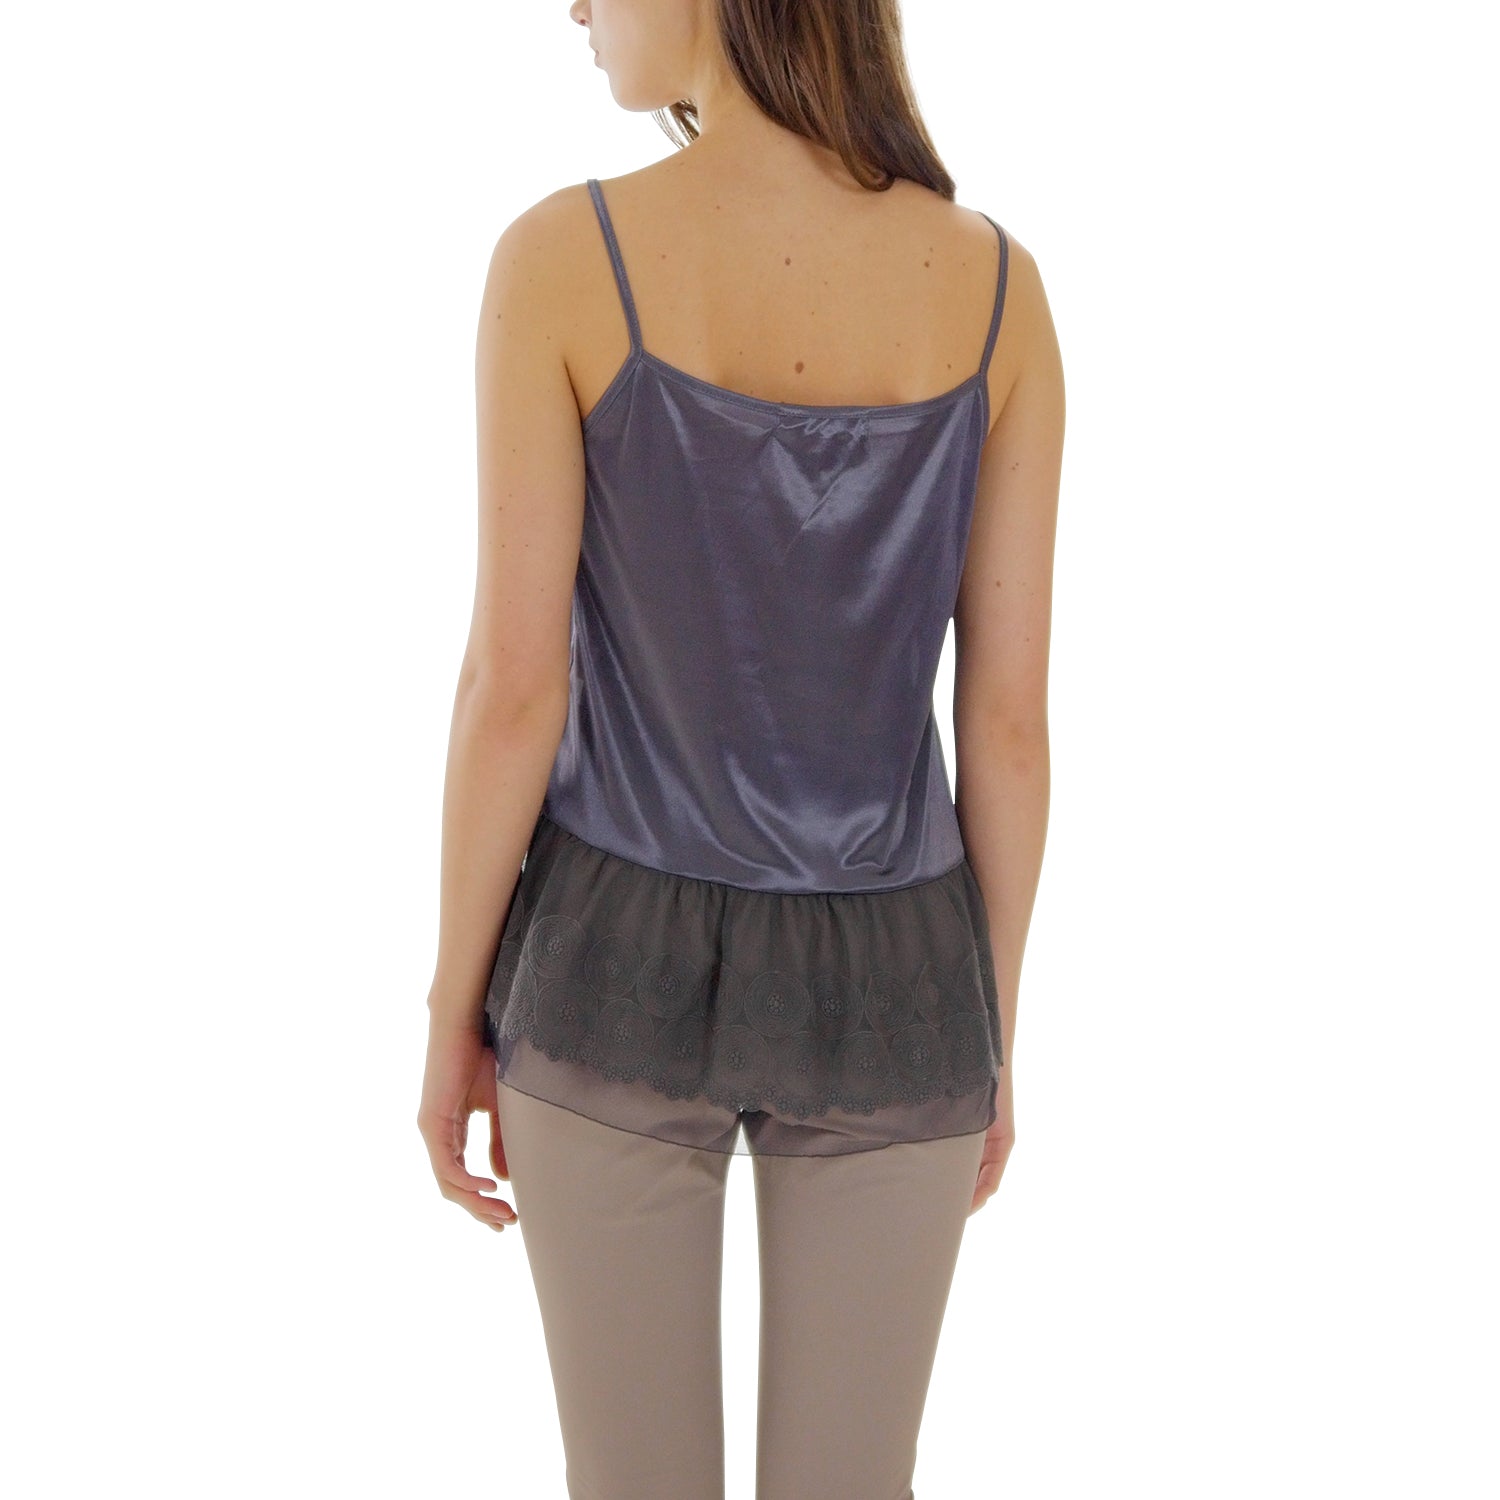 Satin Camisole Top Extender with circle lace bottom - Shop Lev